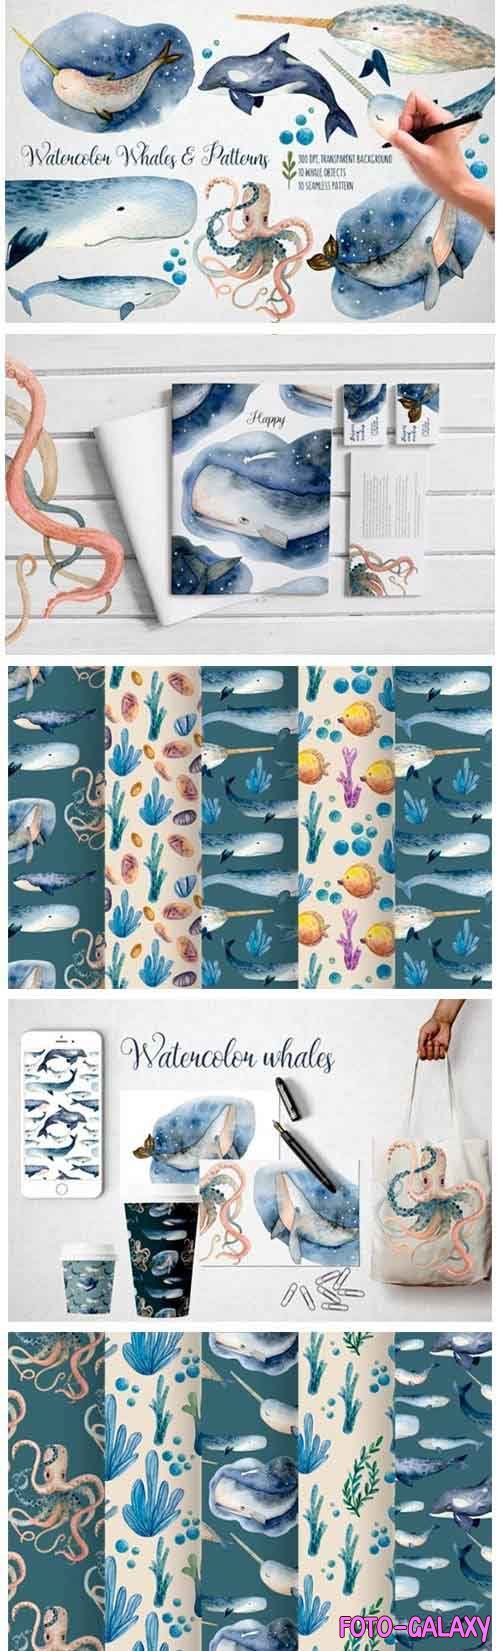 Watercolor Whales & Patterns - 5228352